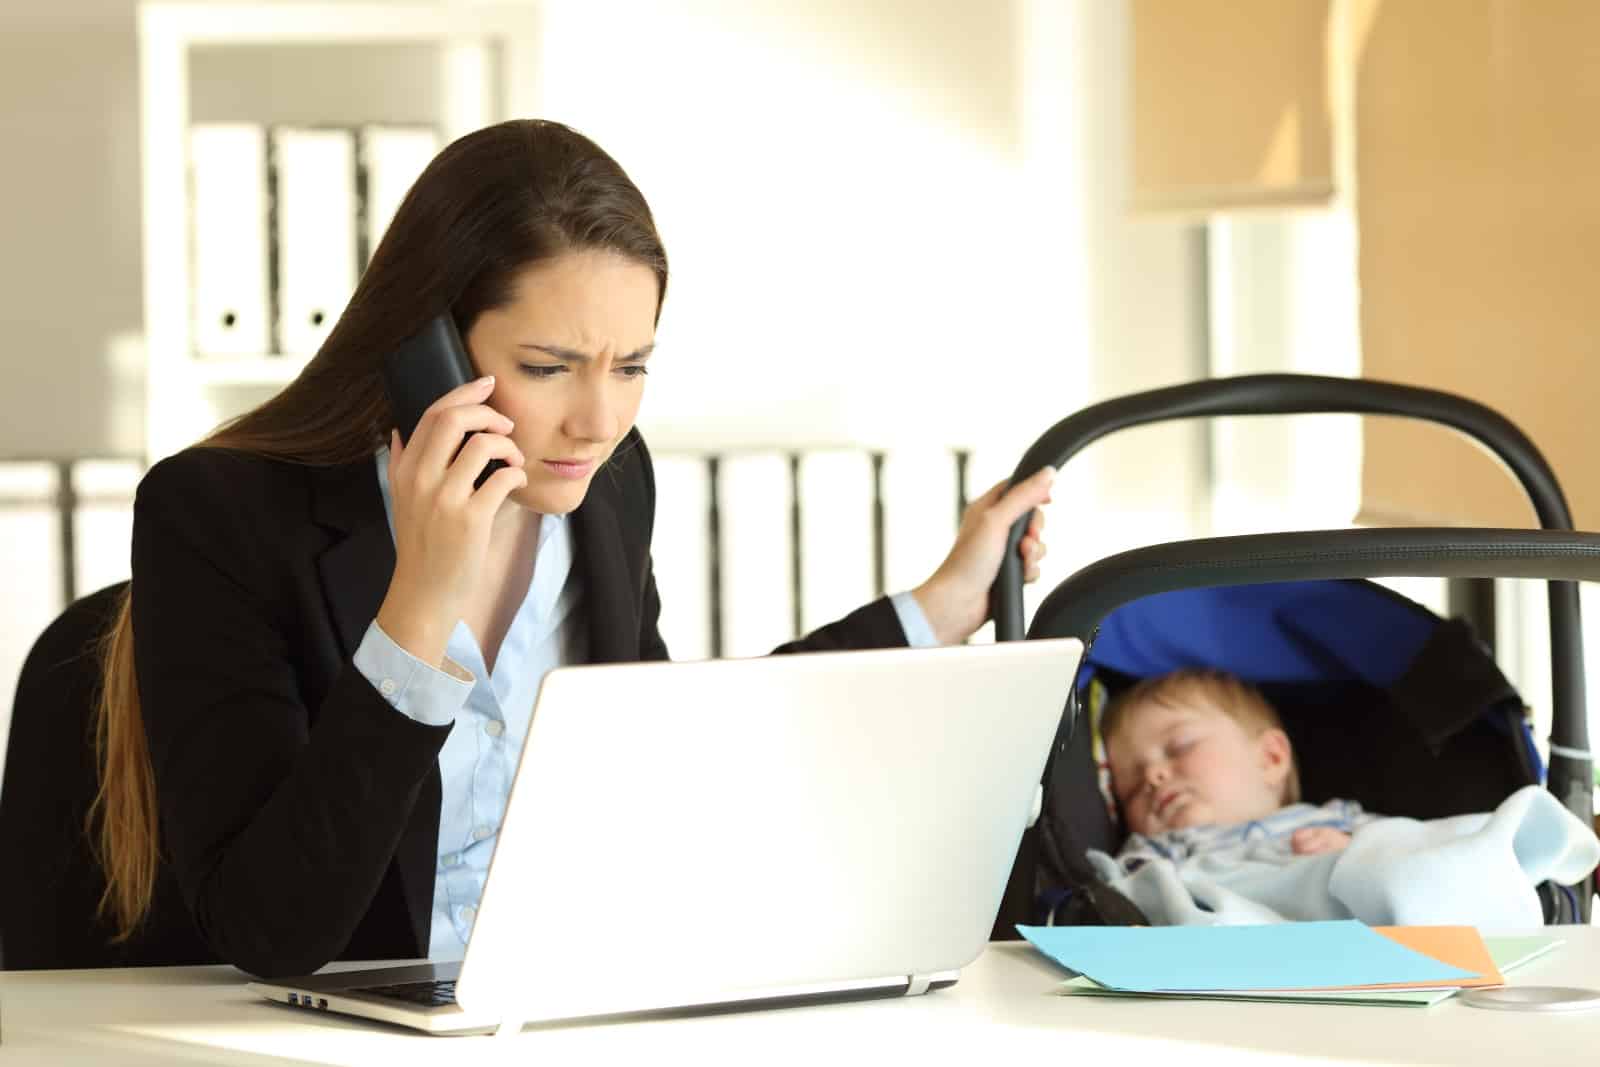 Image Credit: Shutterstock / Antonio Guillem <p><span>Mothers face a steeper pay gap than non-mothers, a disparity that does not similarly affect fathers. This “motherhood penalty” impacts earnings and career advancement.</span></p>